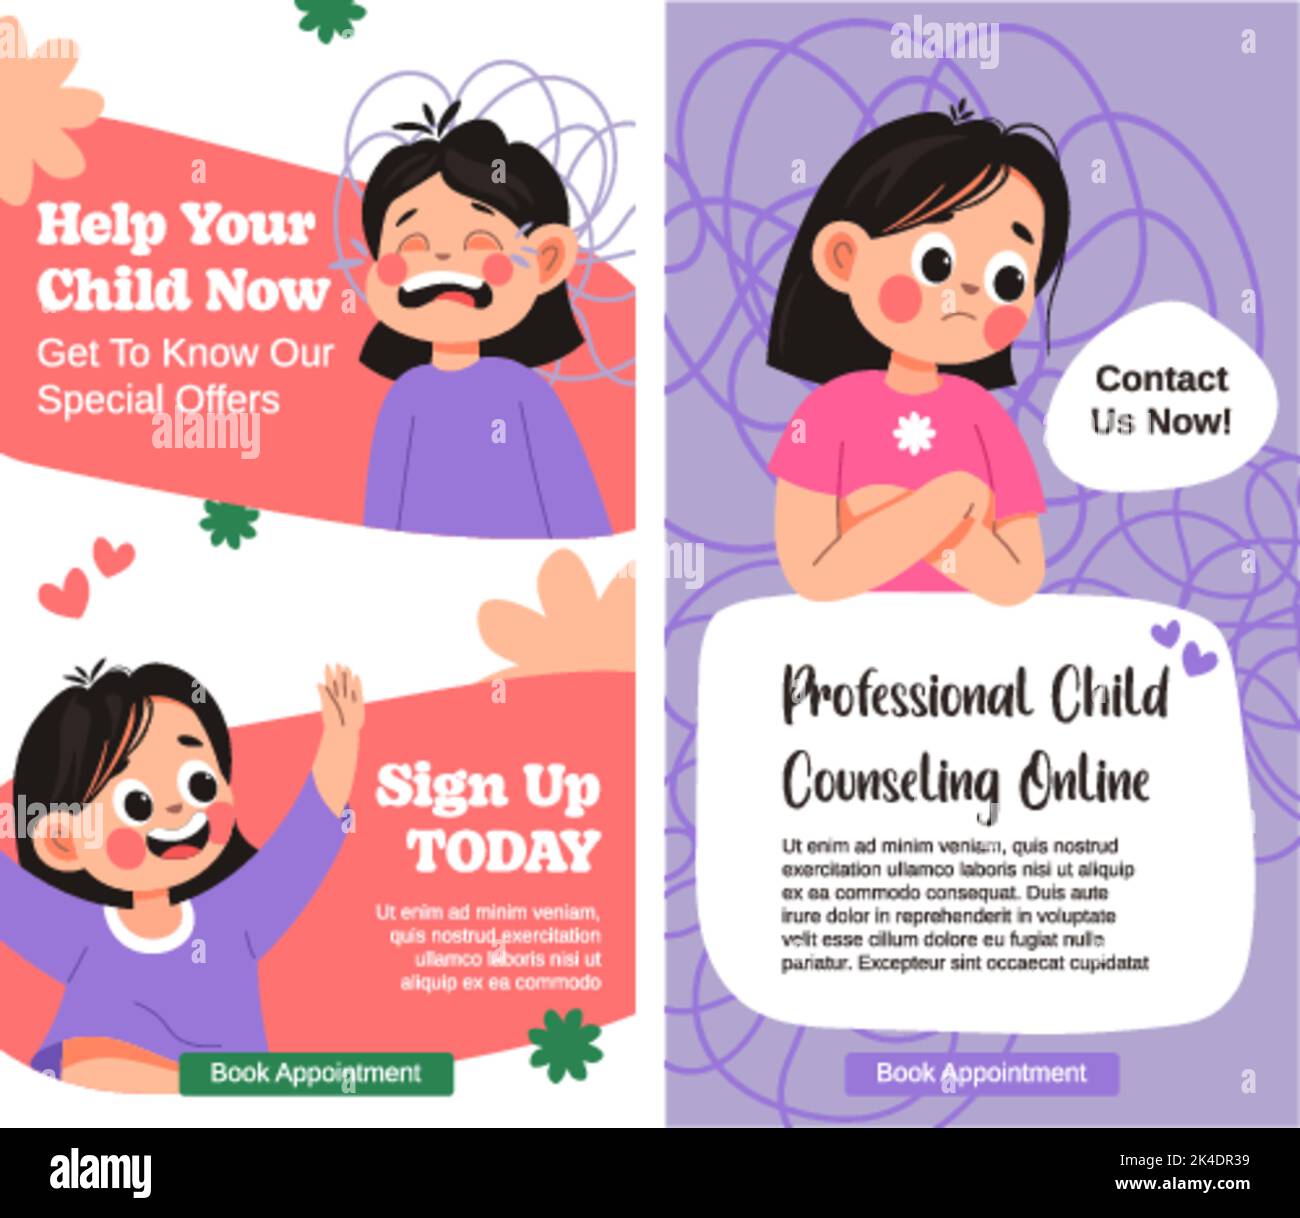 Help your child now, children counseling offer Stock Vector